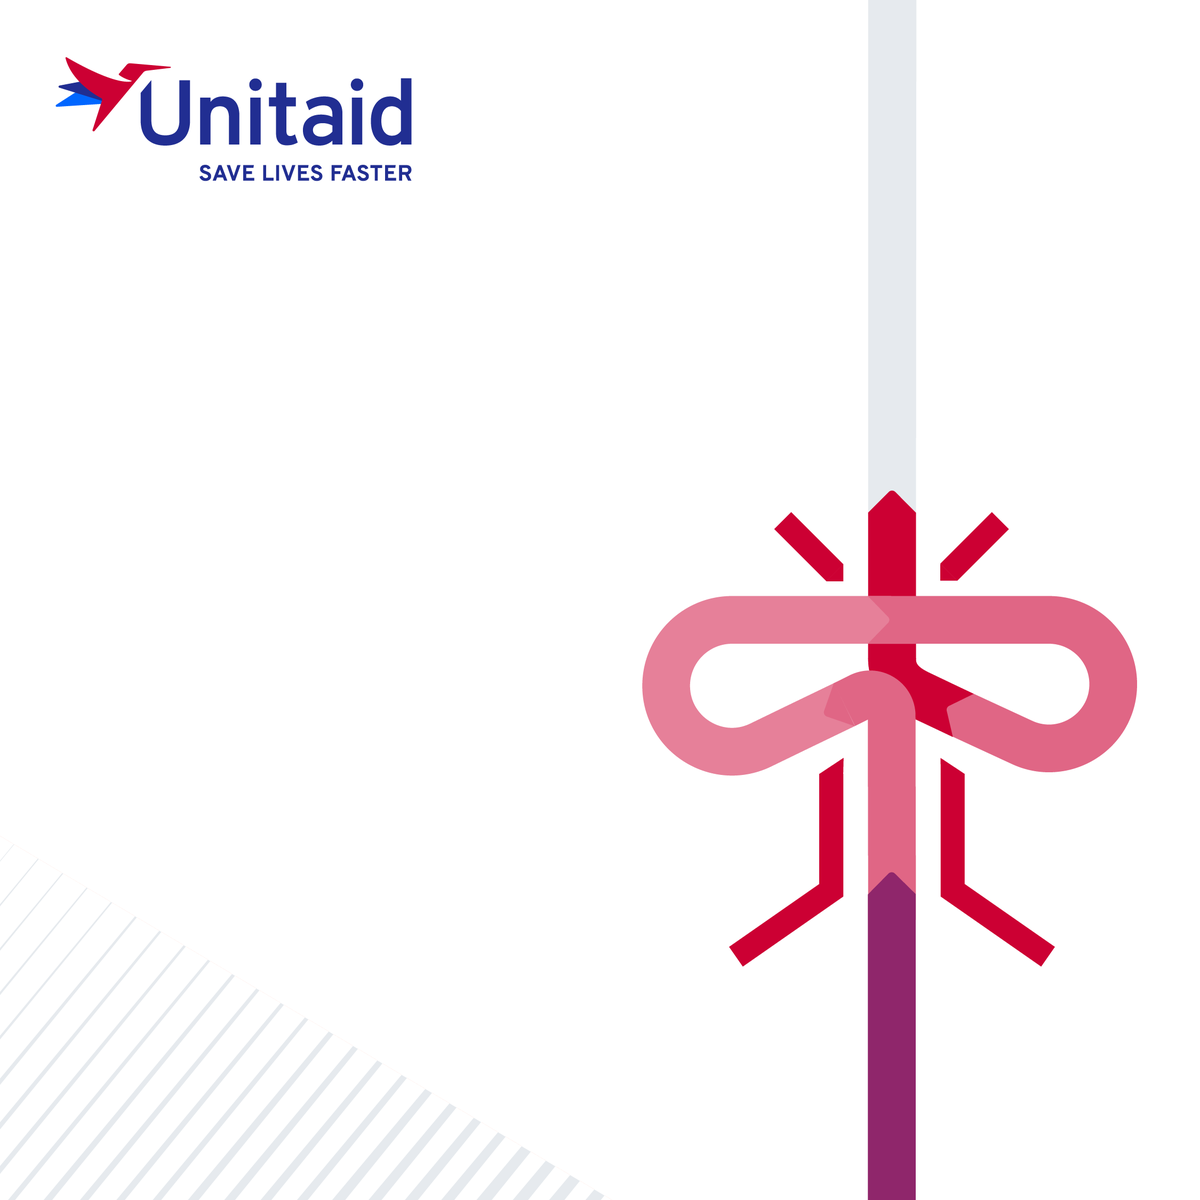 Progress in the malaria fight has plateaued globally, but Unitaid remains dedicated to overcoming health system challenges, funding shortfalls, and biological threats to advance the response. Discover how Unitaid is fighting malaria: unitaid.org/assets/Unitaid…